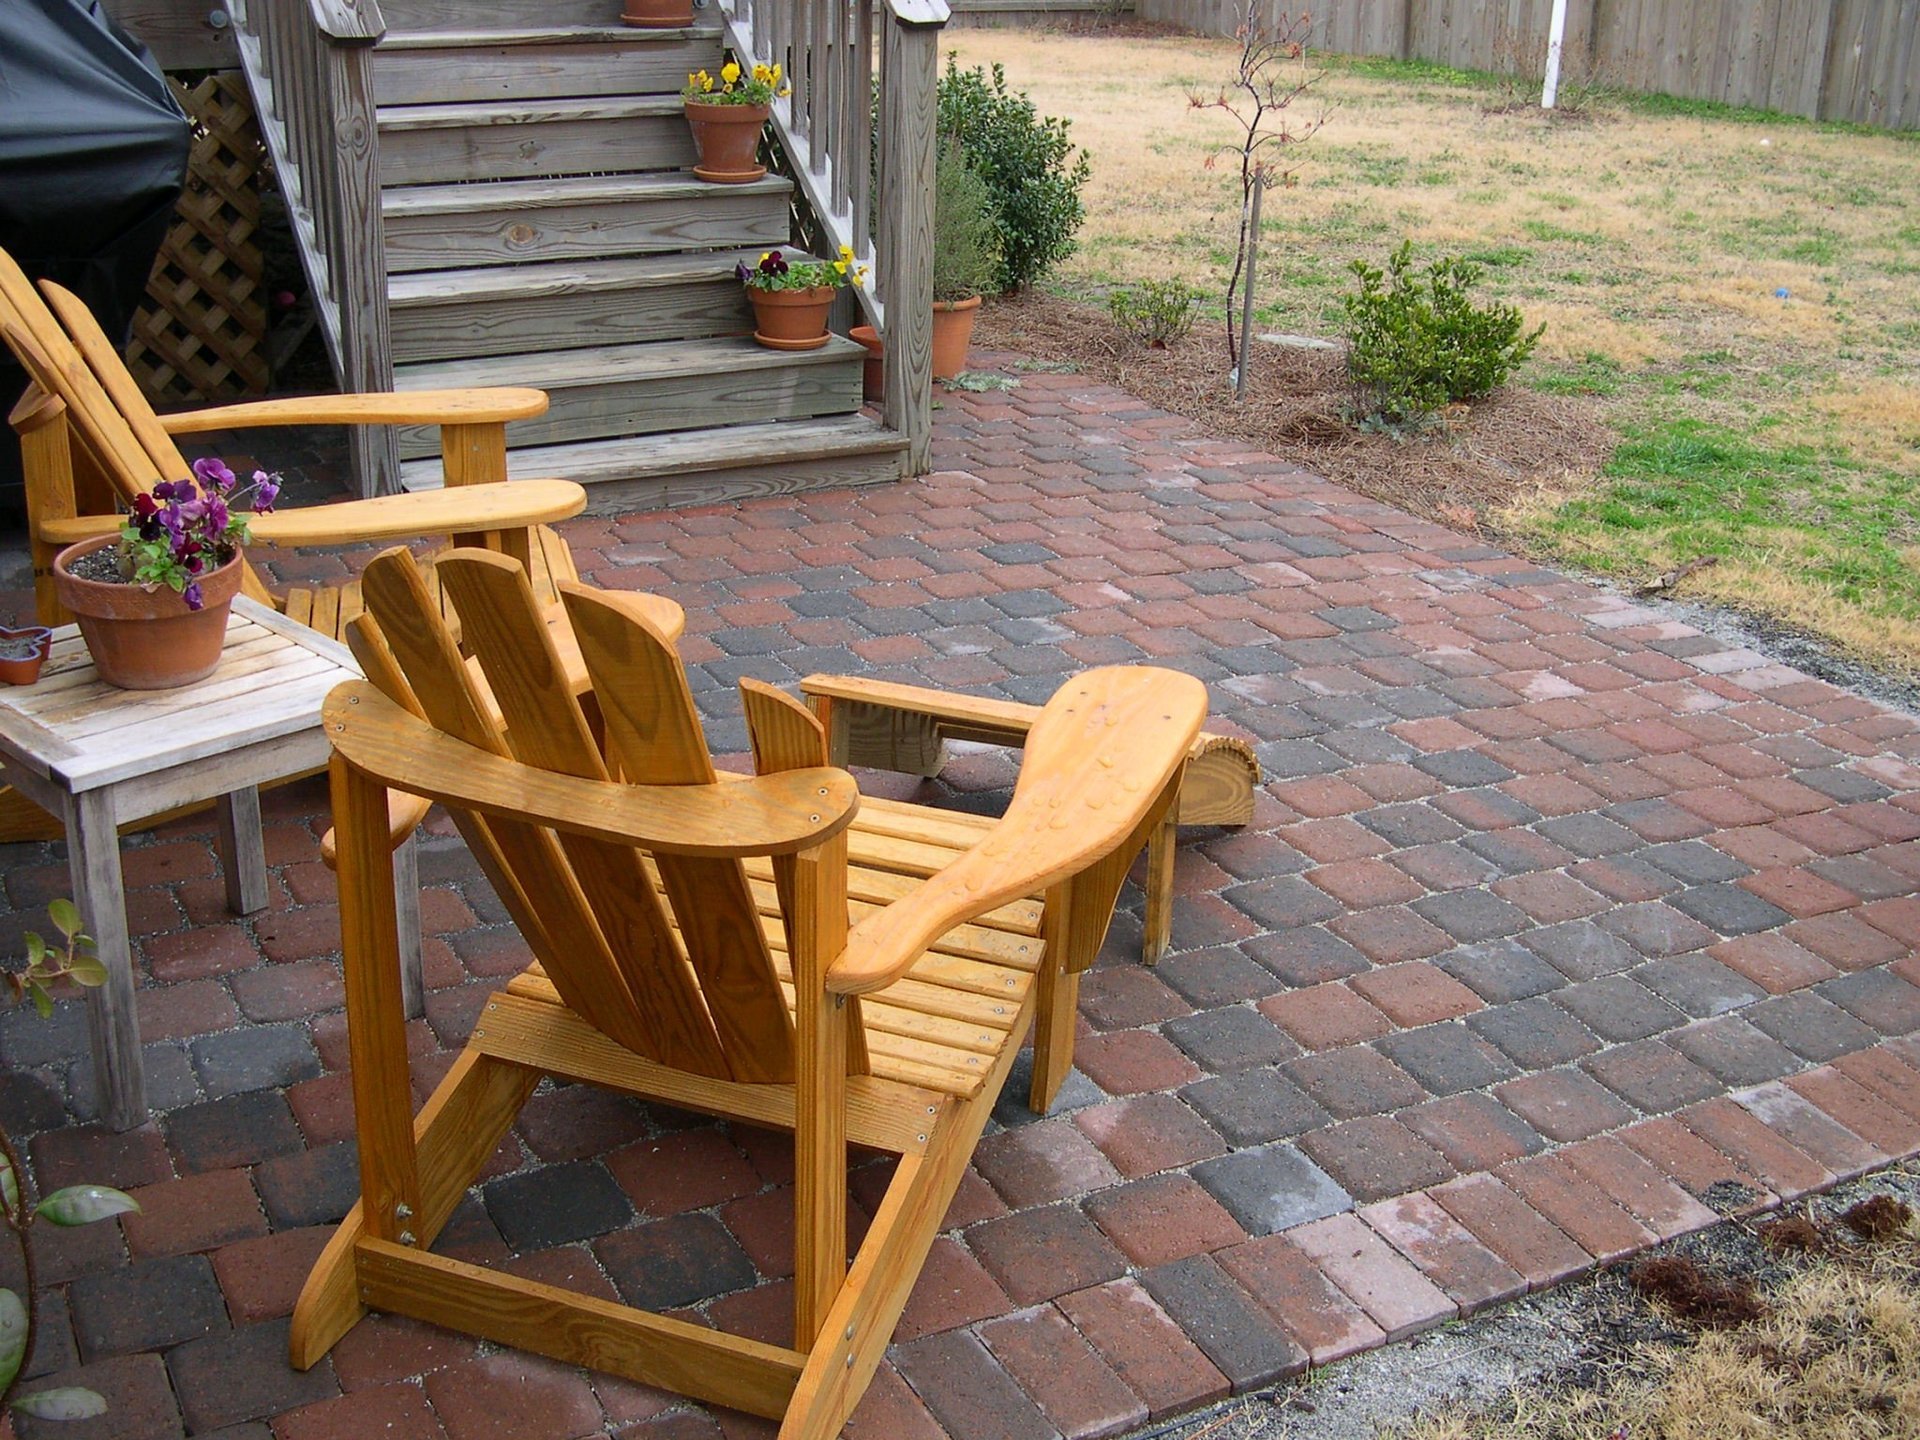 Backyward patio with brick-like material, and two wooden chairs for relaxation.